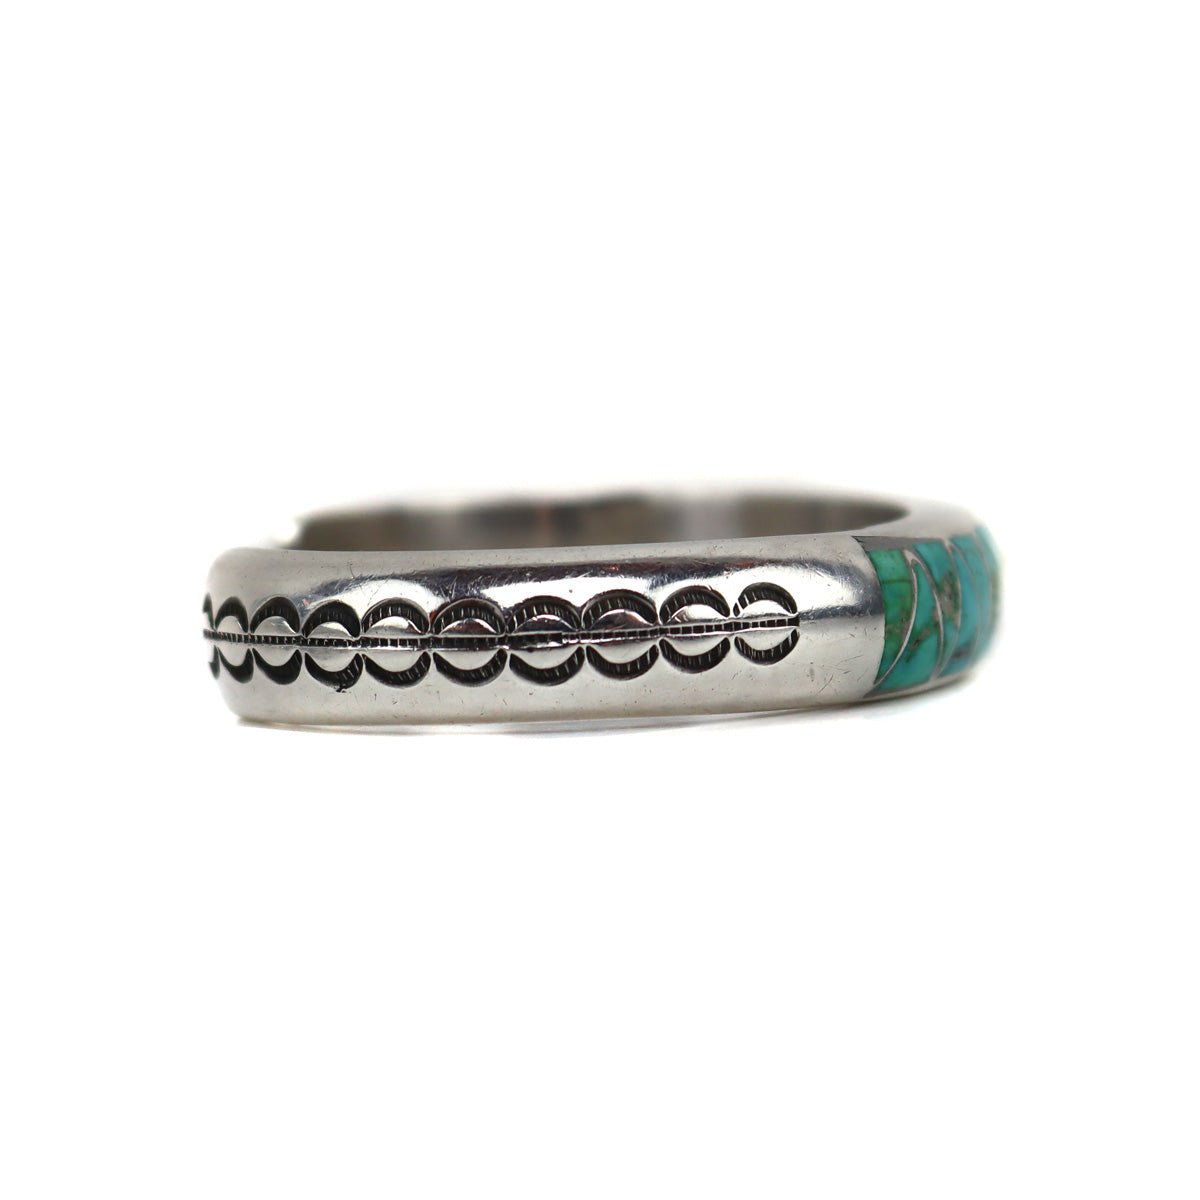 Zuni Turquoise and Silver Channel Inlay Bracelet c. 1960s, size 6 (J15552-CO-046) 1